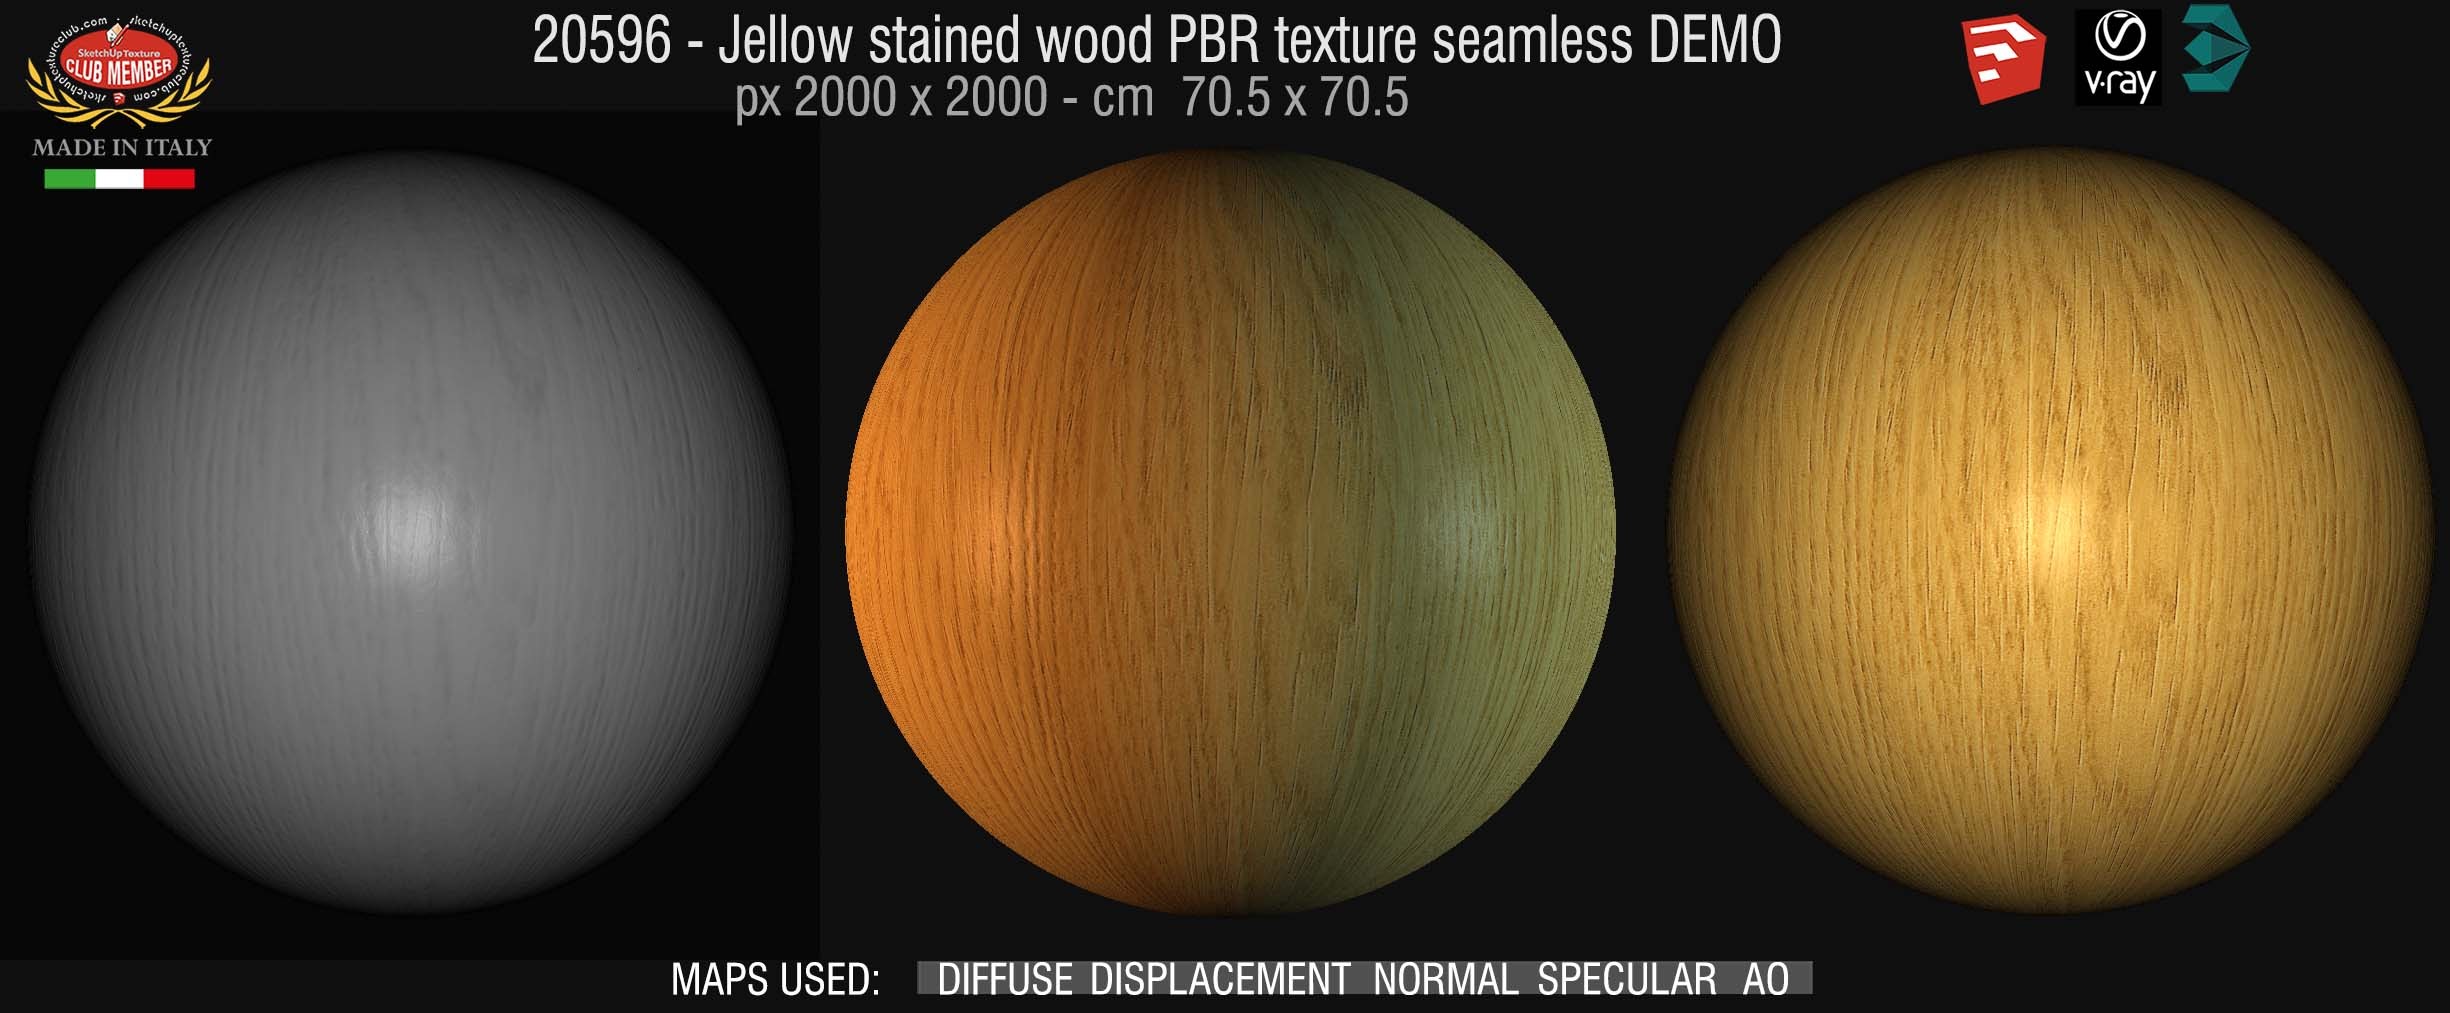 20596 Yellow stained wood PBR texture seamless DEMO